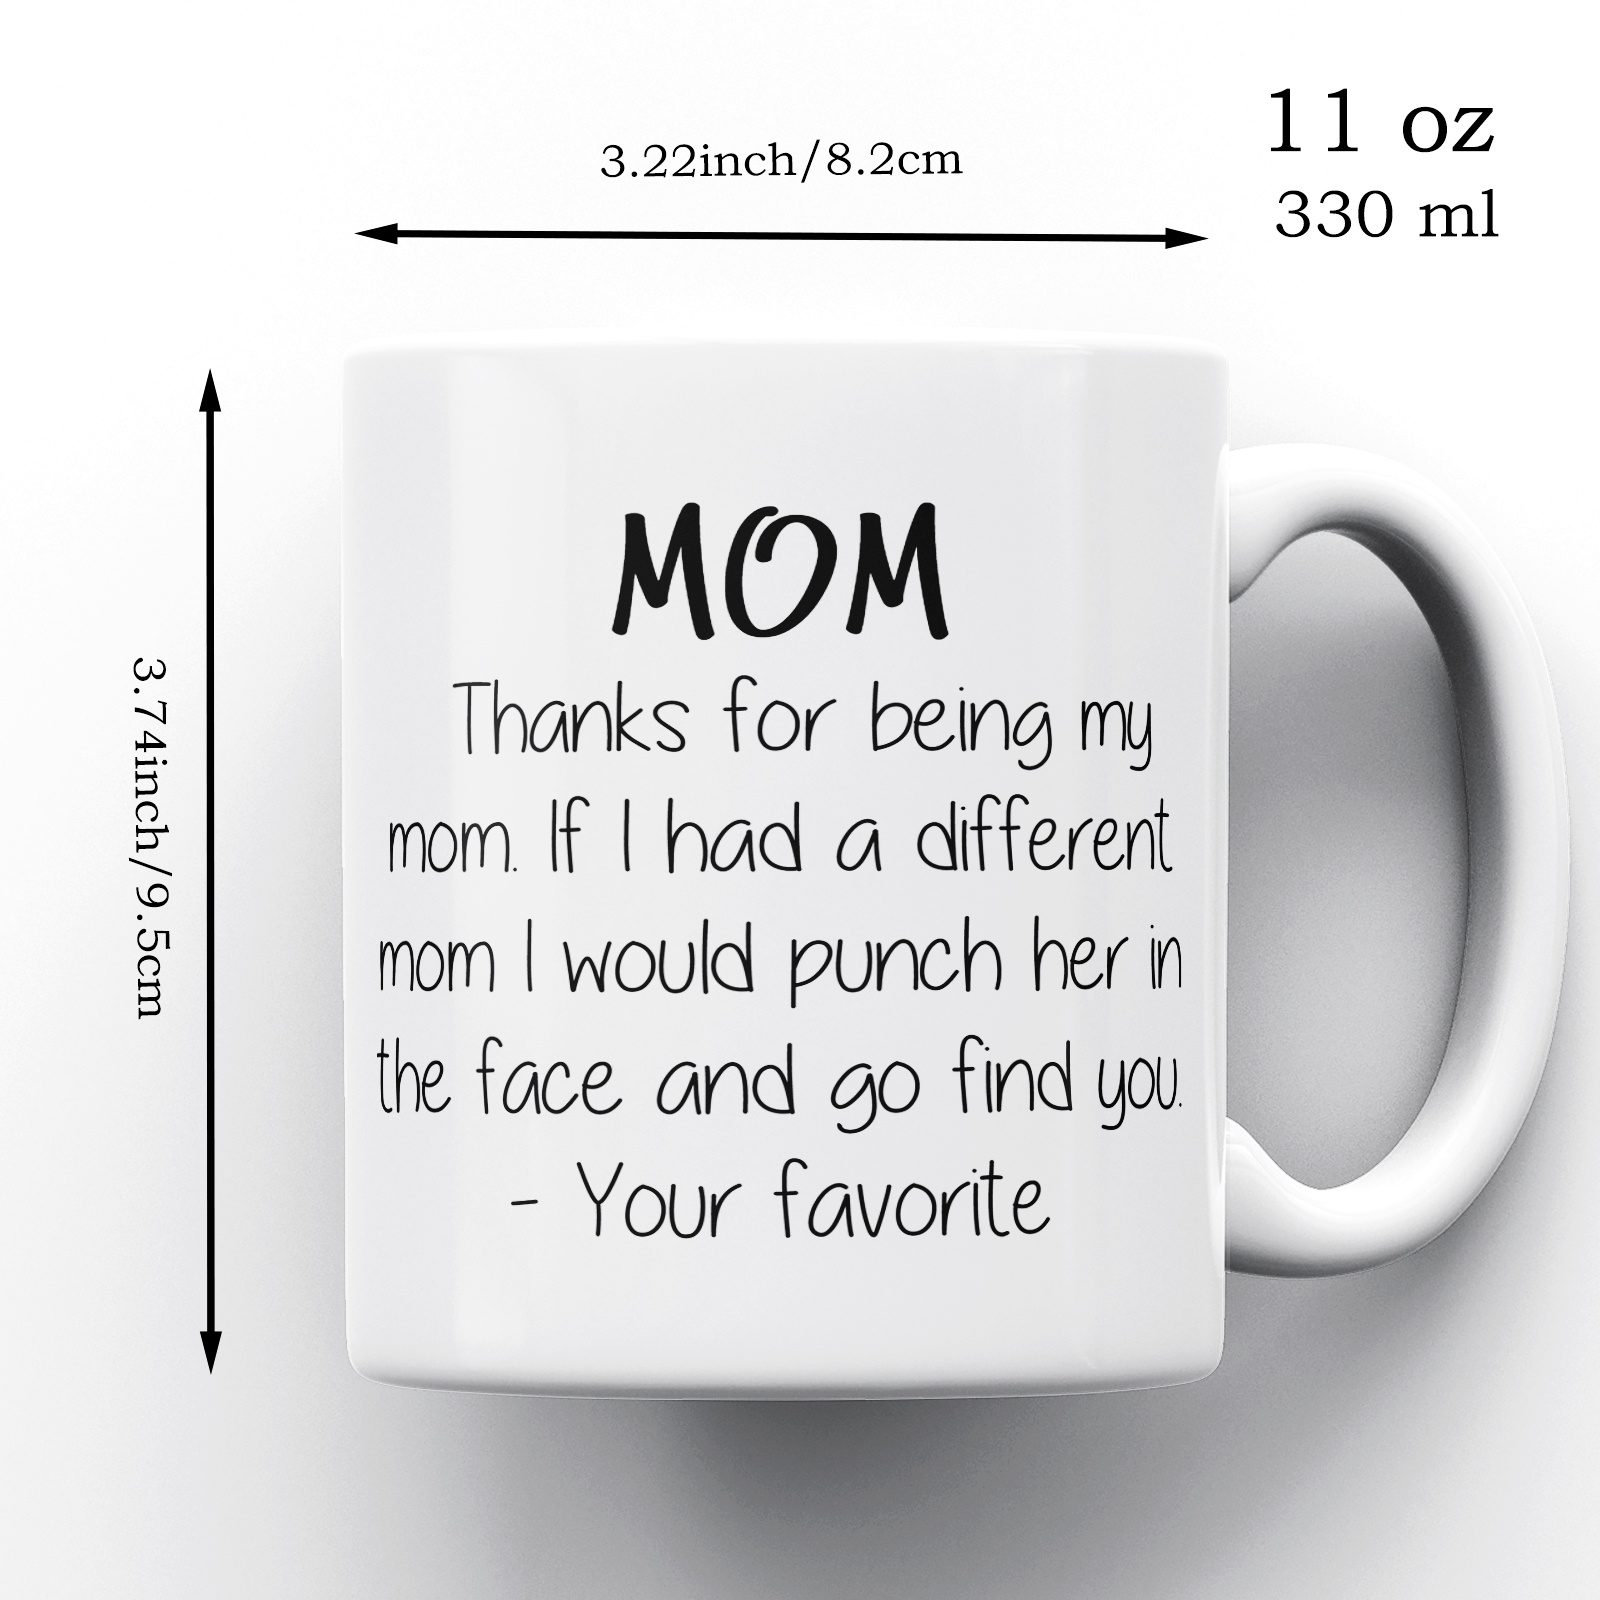 Thanks For Being My Mom Funny Coffee Mug - Best Christmas Gifts for Mom,  Women - Unique Gag Xmas Present for Her from Daughter or Son - Top Birthday